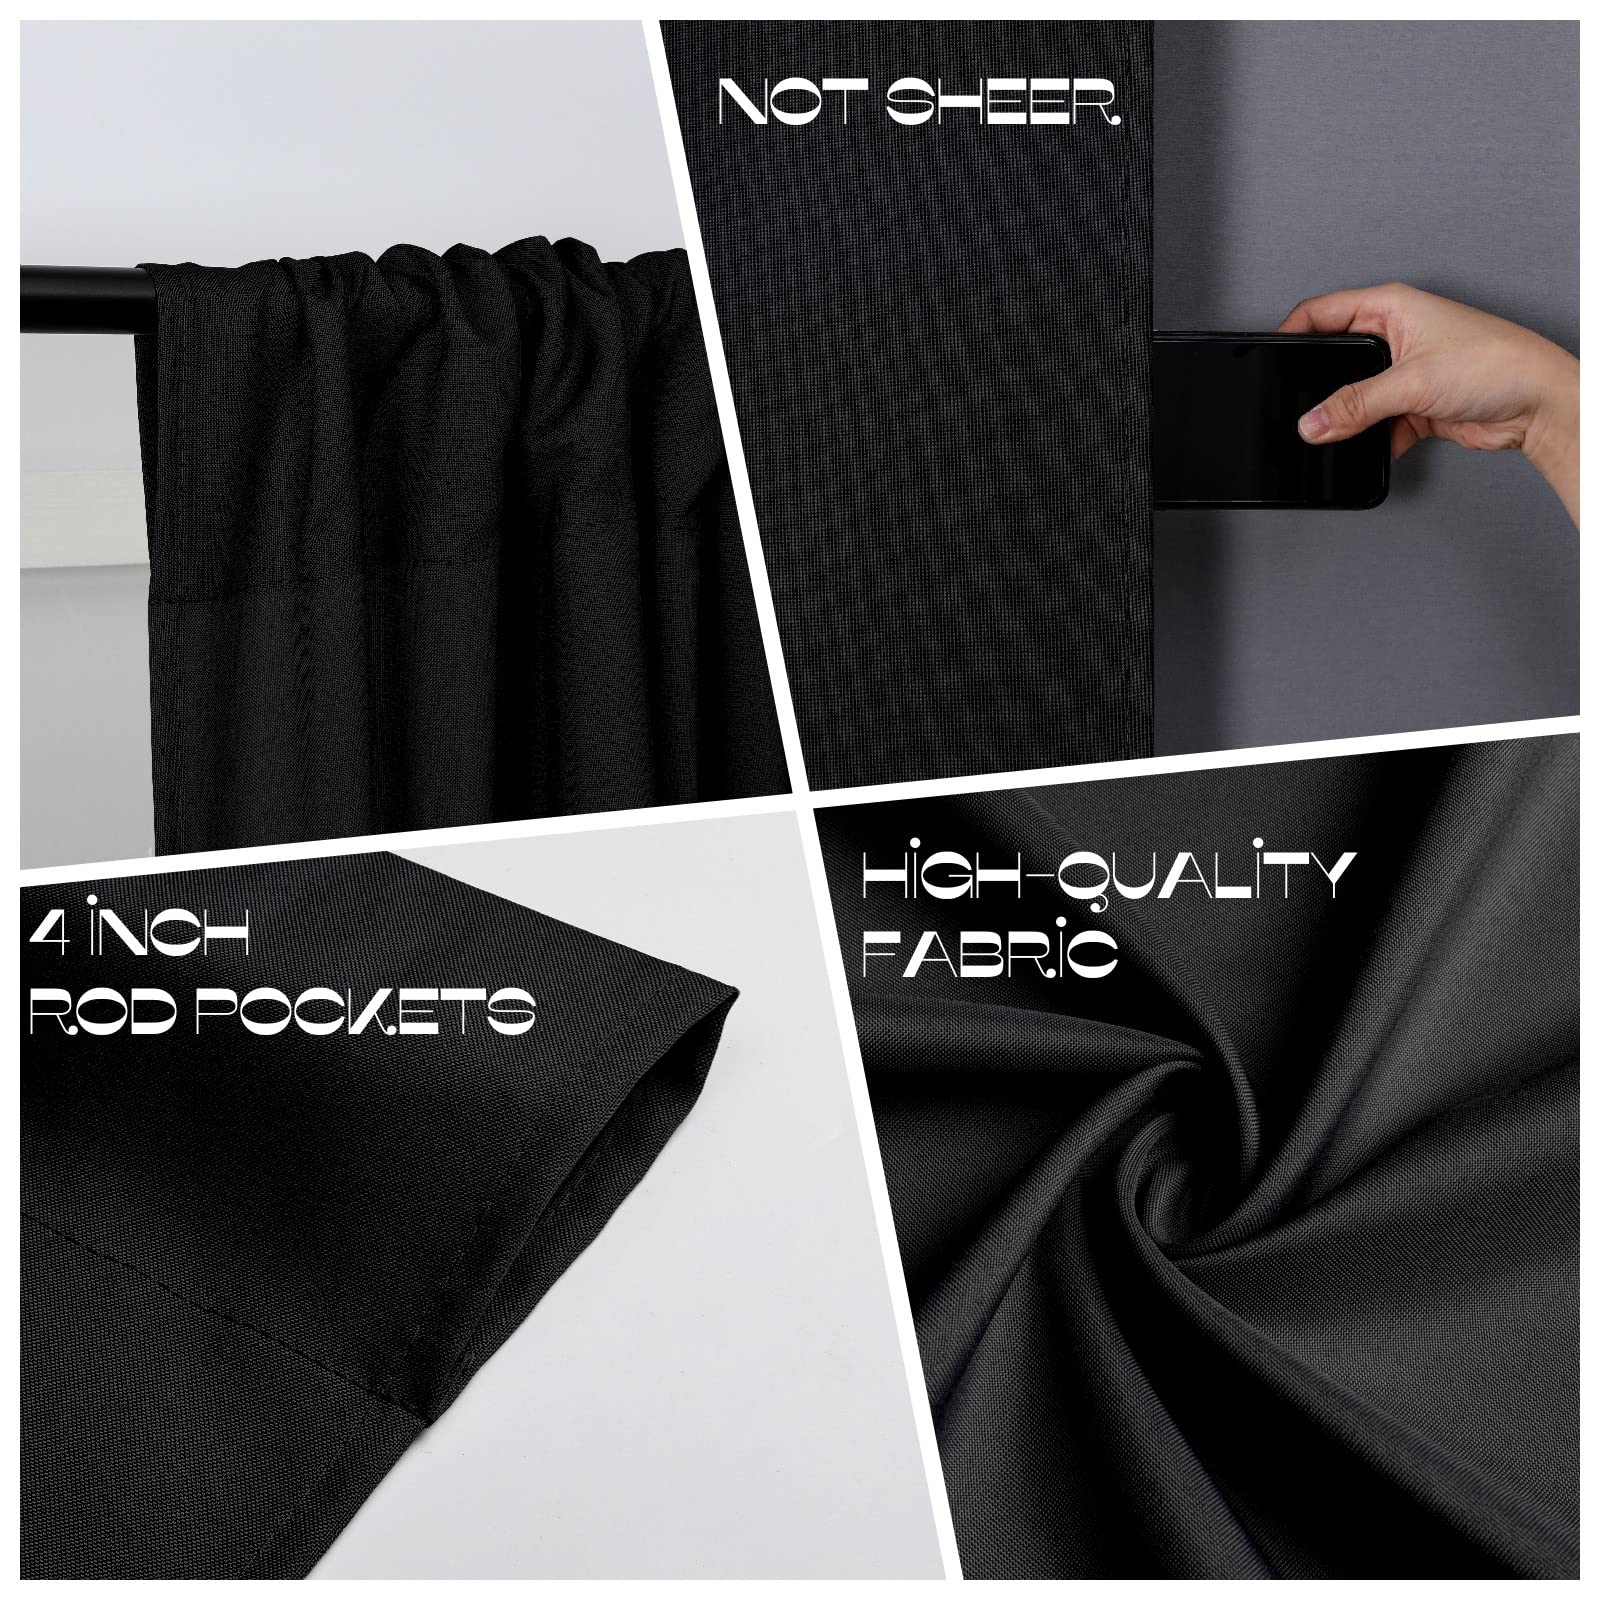 Joydeco Black Backdrop Curtains for Parties, 10x10 Wrinkle Free Black Backdrop Drapes for Birthday Party Home Party, Curtains Backdrop 5ft x 10ft 2 Panels with Rod Pockets